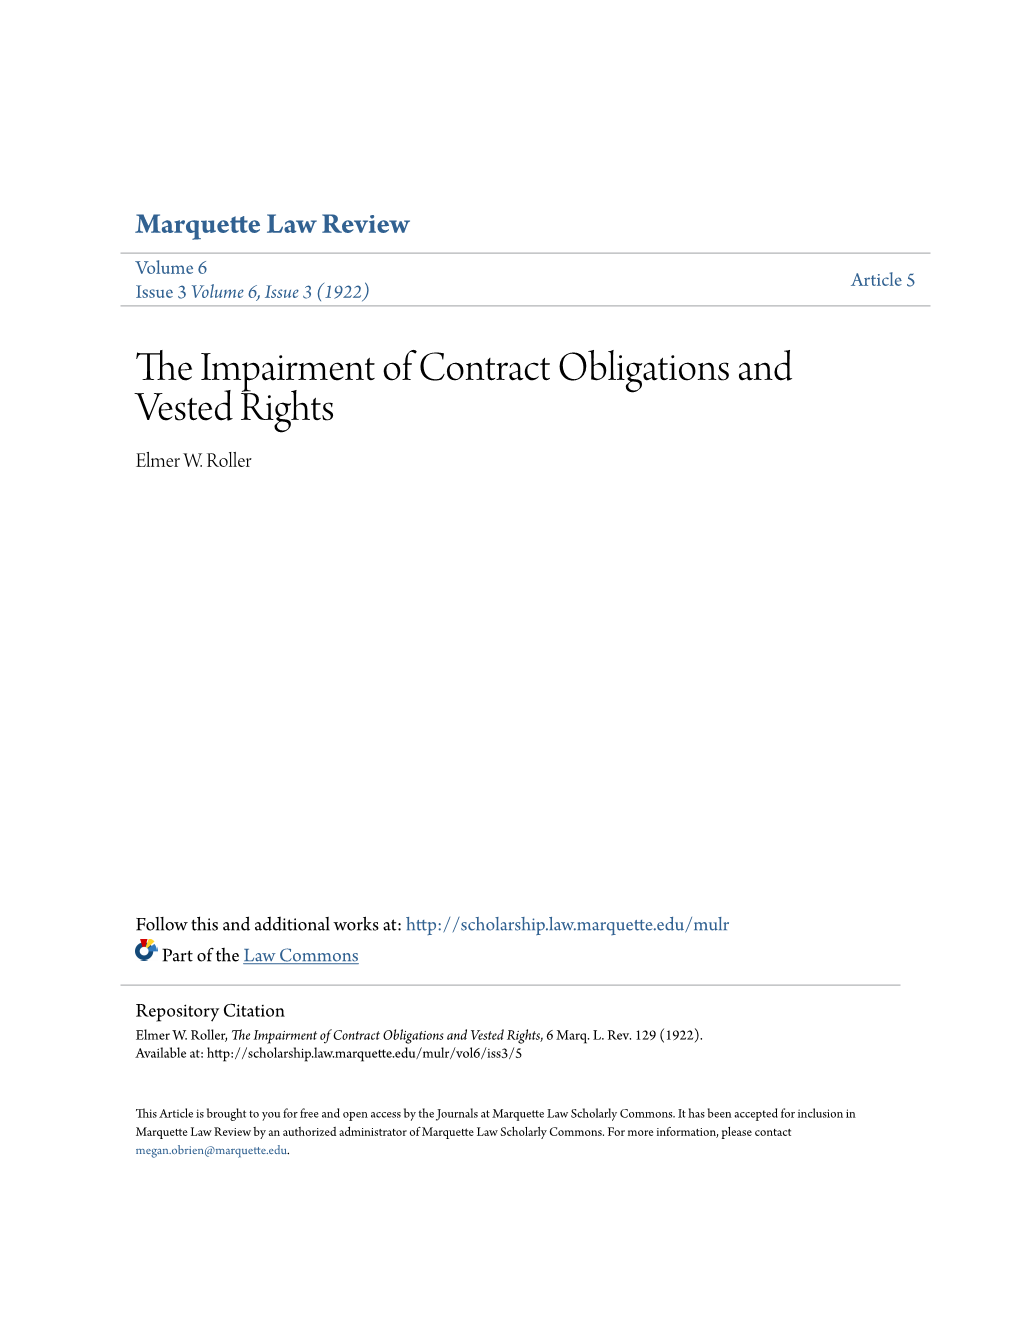 The Impairment of Contract Obligations and Vested Rights, 6 Marq